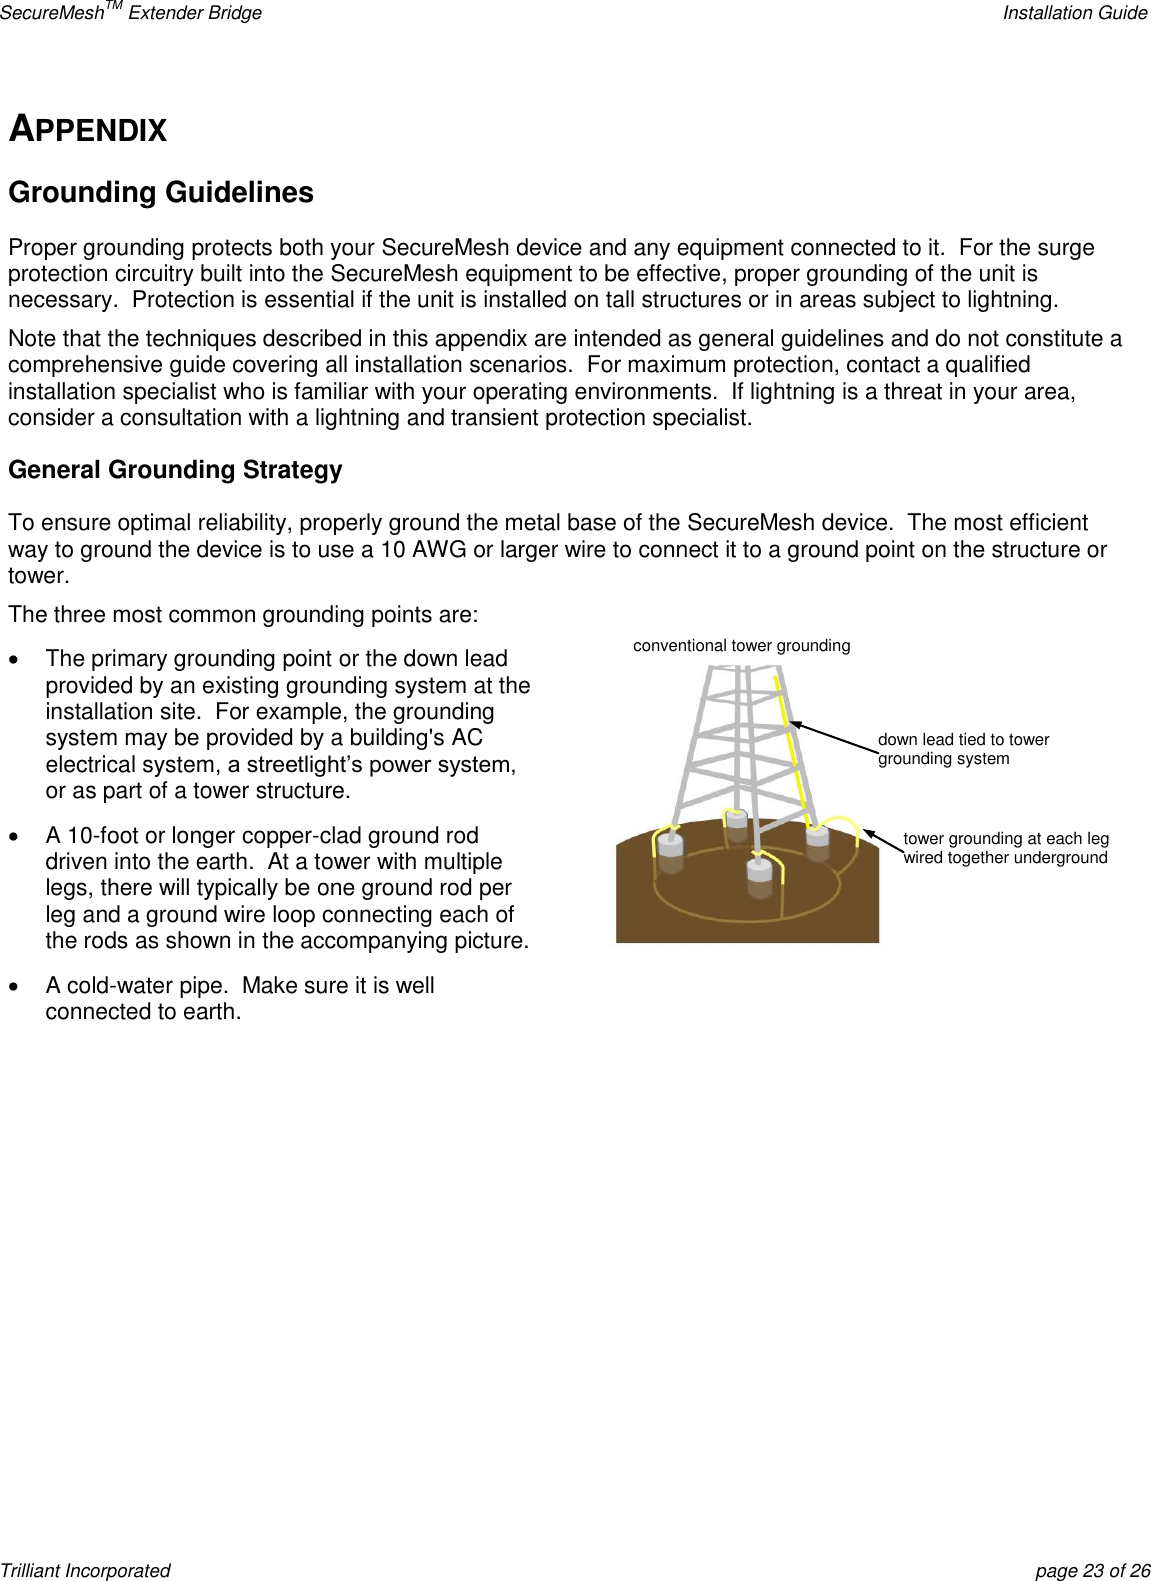 SecureMeshTM Extender Bridge    Installation Guide Trilliant Incorporated  page 23 of 26 APPENDIX Grounding Guidelines Proper grounding protects both your SecureMesh device and any equipment connected to it.  For the surge protection circuitry built into the SecureMesh equipment to be effective, proper grounding of the unit is necessary.  Protection is essential if the unit is installed on tall structures or in areas subject to lightning. Note that the techniques described in this appendix are intended as general guidelines and do not constitute a comprehensive guide covering all installation scenarios.  For maximum protection, contact a qualified installation specialist who is familiar with your operating environments.  If lightning is a threat in your area, consider a consultation with a lightning and transient protection specialist. General Grounding Strategy To ensure optimal reliability, properly ground the metal base of the SecureMesh device.  The most efficient way to ground the device is to use a 10 AWG or larger wire to connect it to a ground point on the structure or tower. The three most common grounding points are:   The primary grounding point or the down lead provided by an existing grounding system at the installation site.  For example, the grounding system may be provided by a building&apos;s AC electrical system, a streetlight’s power system, or as part of a tower structure.   A 10-foot or longer copper-clad ground rod driven into the earth.  At a tower with multiple legs, there will typically be one ground rod per leg and a ground wire loop connecting each of the rods as shown in the accompanying picture.    A cold-water pipe.  Make sure it is well connected to earth.   tower grounding at each leg wired together underground  down lead tied to tower grounding system  conventional tower grounding  